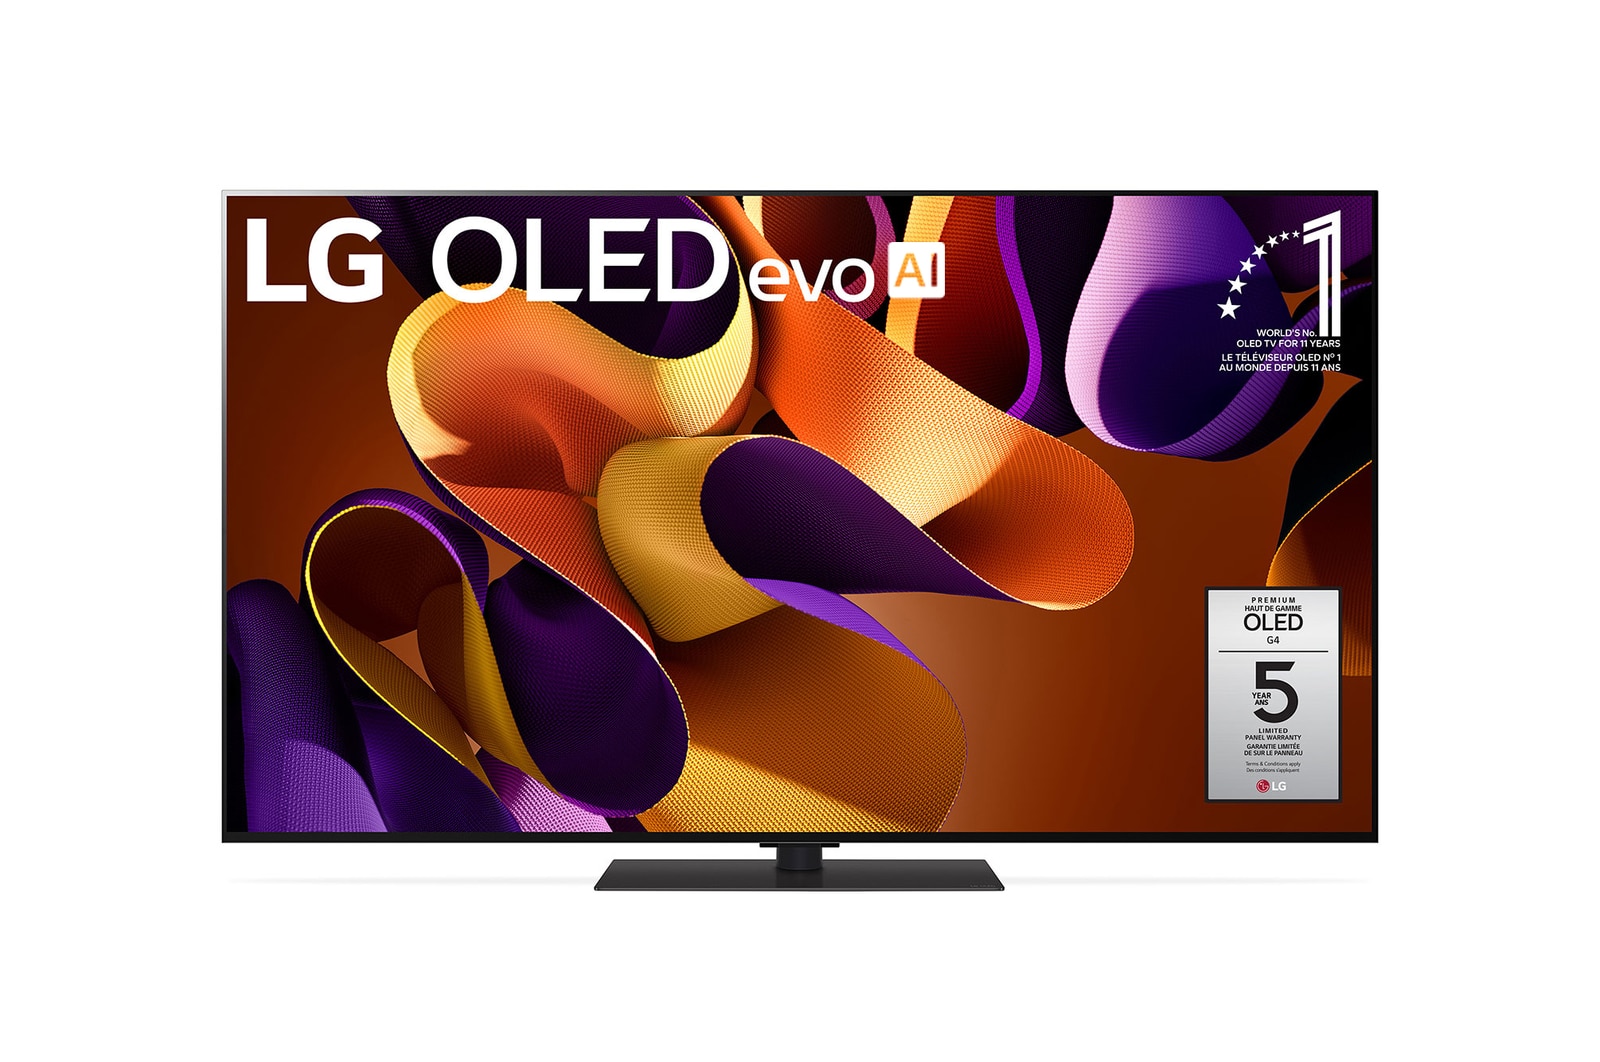 Front view with LG OLED evo AI TV, OLED G4, 11 Years of world number 1 OLED Emblem, webOS Re:New Program logo, and 5-Year Panel Warranty logo on screen